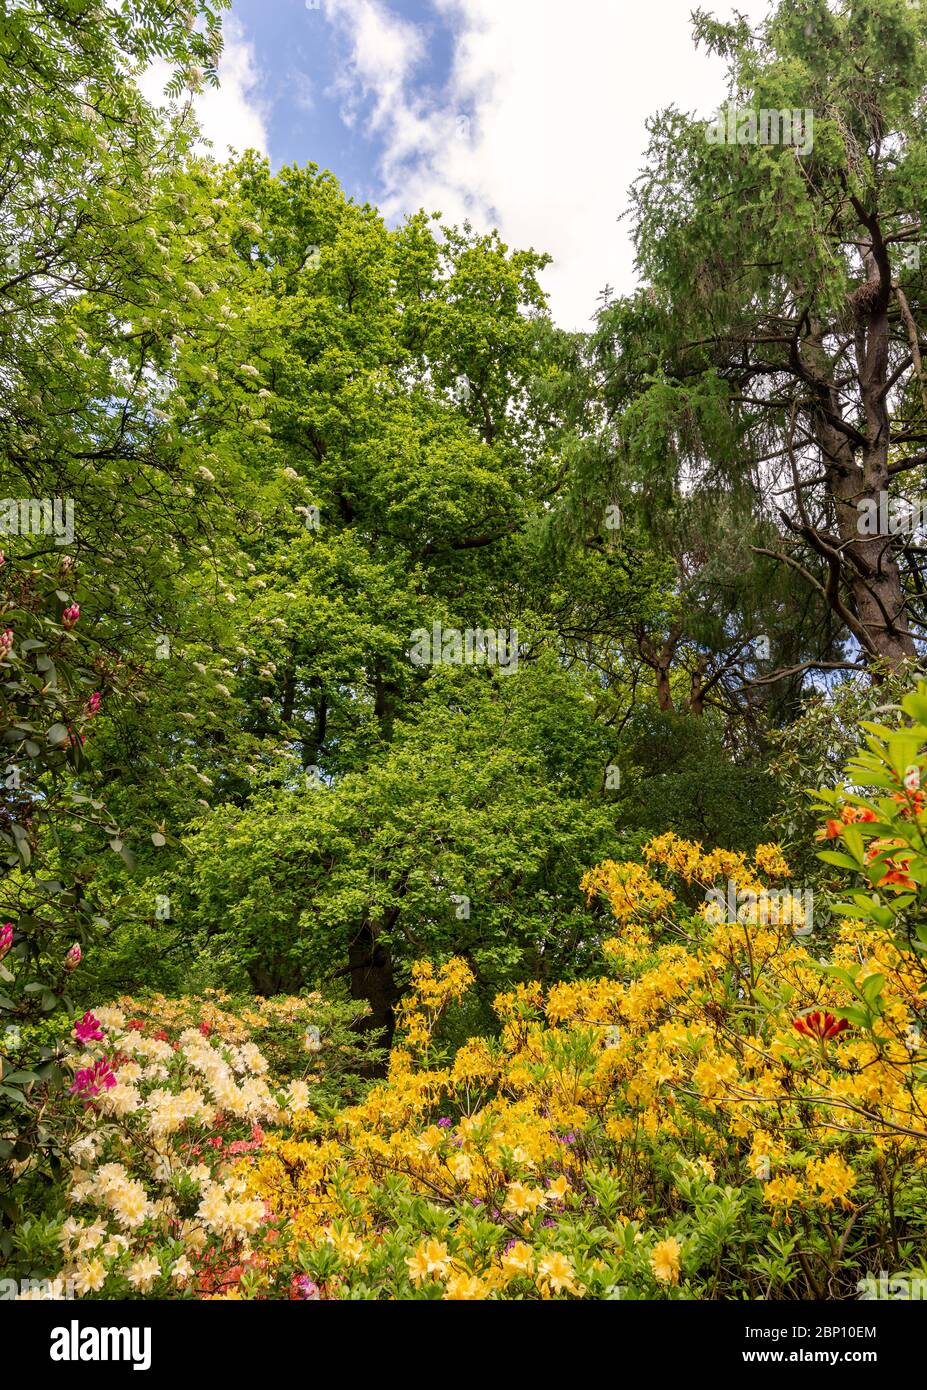 Rhododendron flowers in a woodland setting.  Yellow, white and red flowers are set amongst some trees and a blue sky with clouds is above. Stock Photo